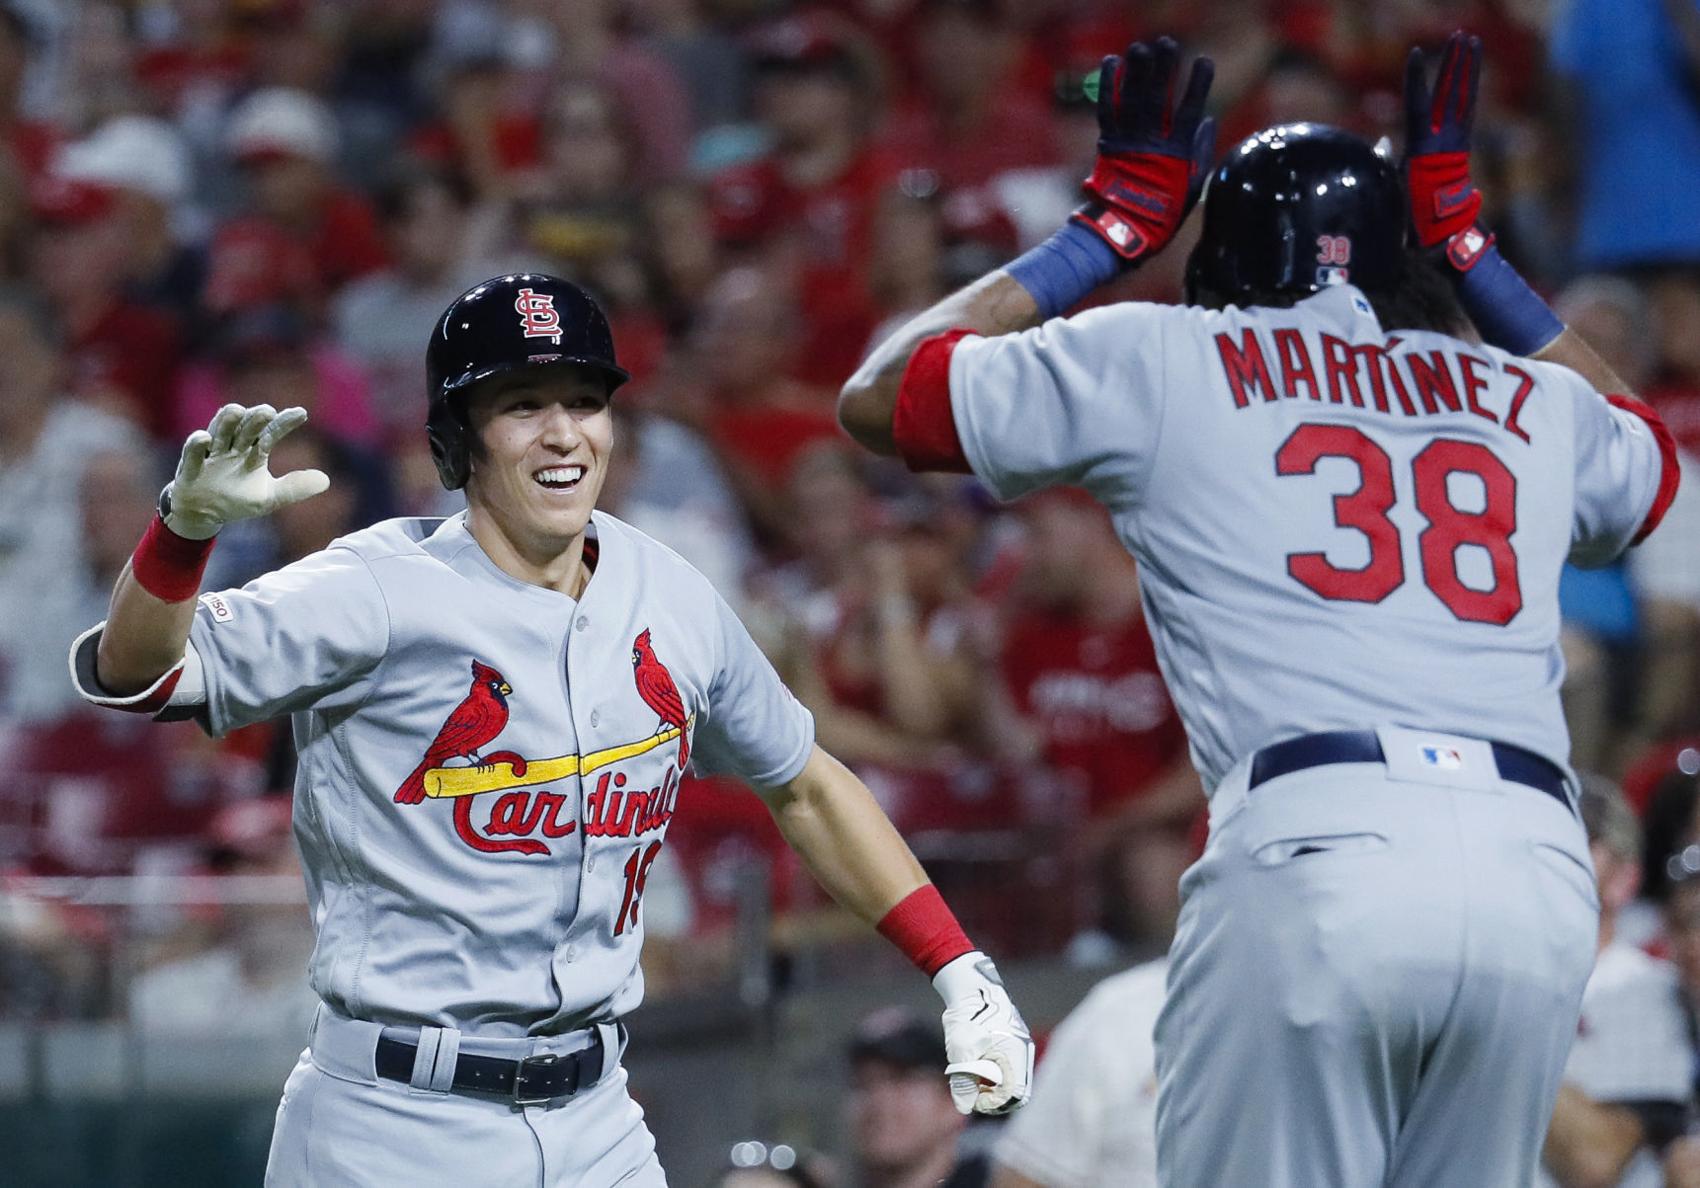 That's grand: Cardinals first slam of the season from Tommy Edman helps beat Reds